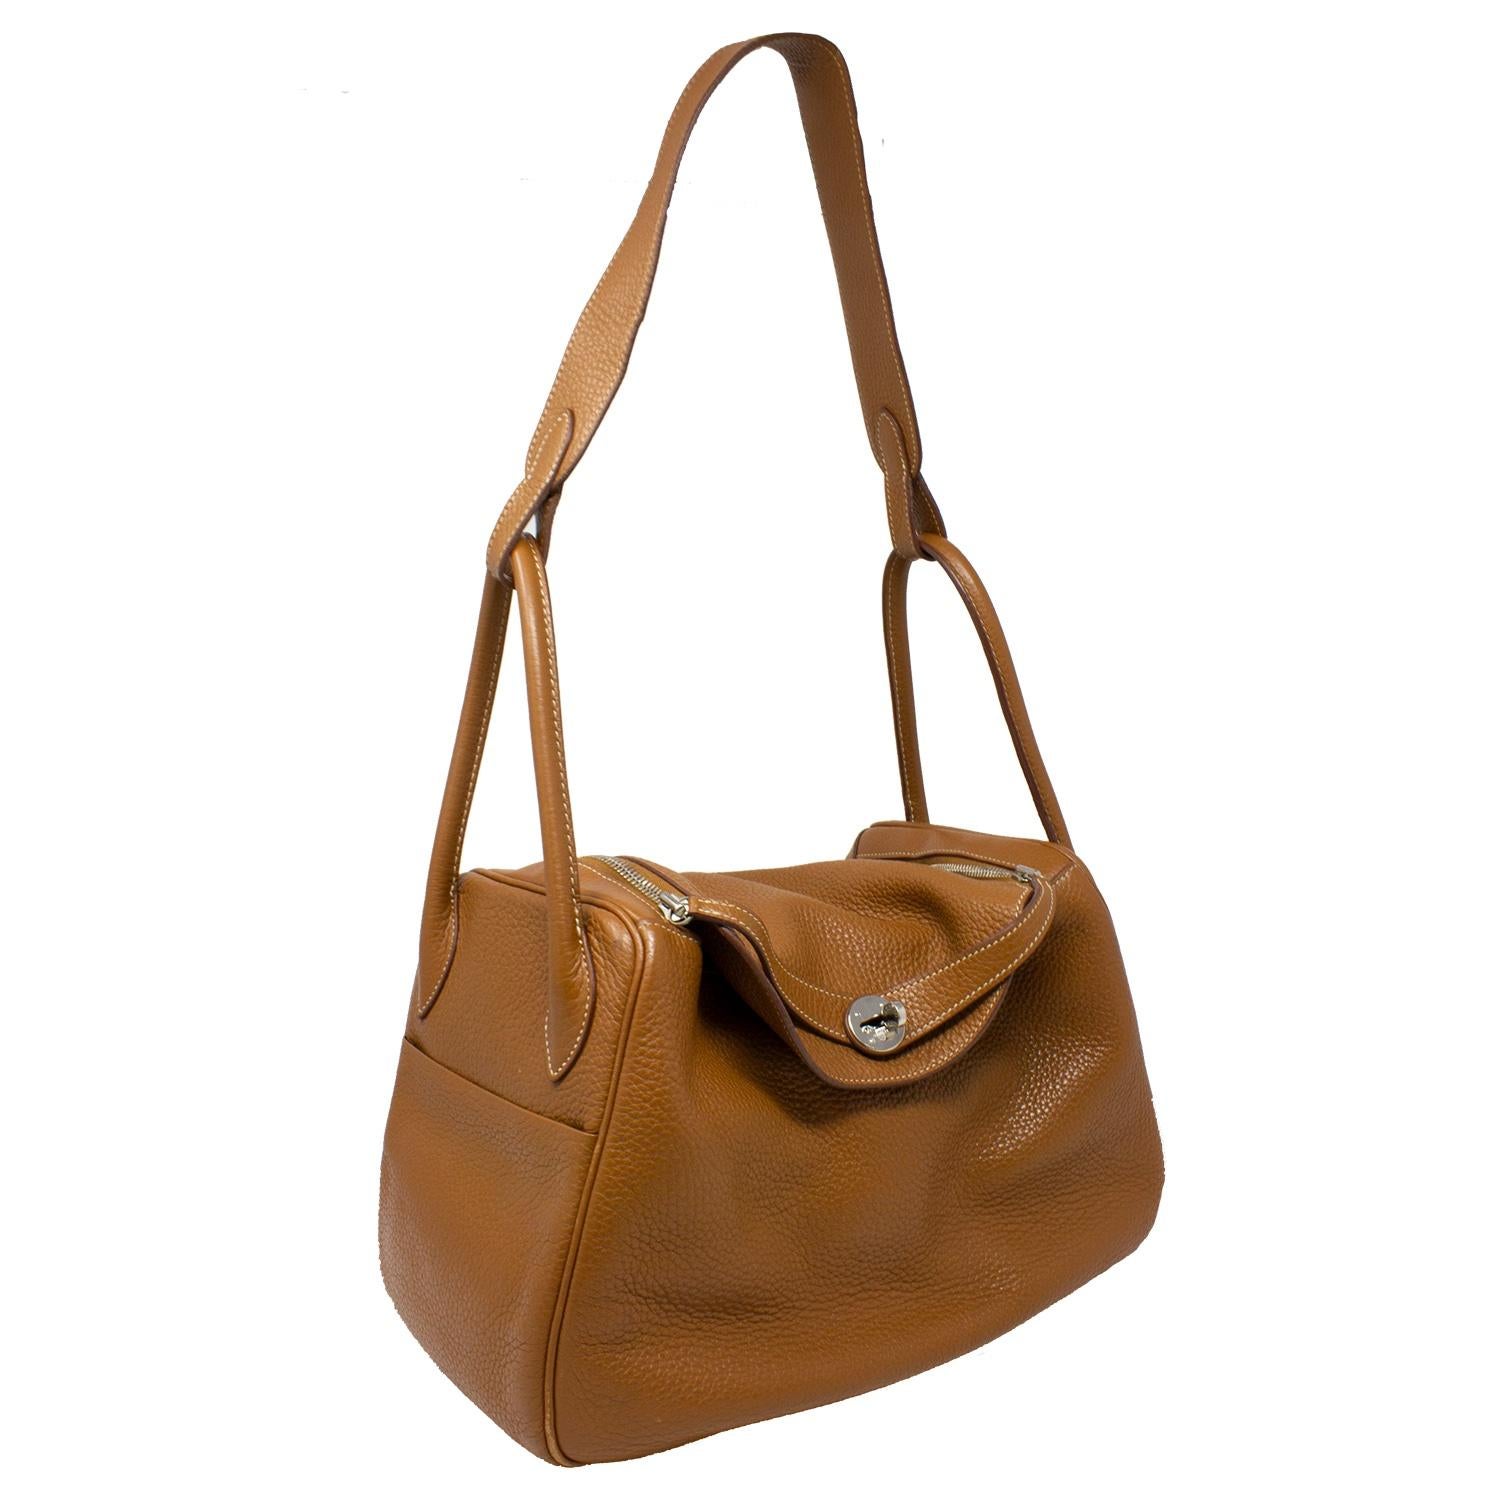 Gorgeous and elegant Lindy crafted in brown Clemence leather with silver-tone hardware, a single shoulder strap and top handles, double side exterior pockets, and protective feet to the base. The zip closure at top opens up to a tonal brown spacious